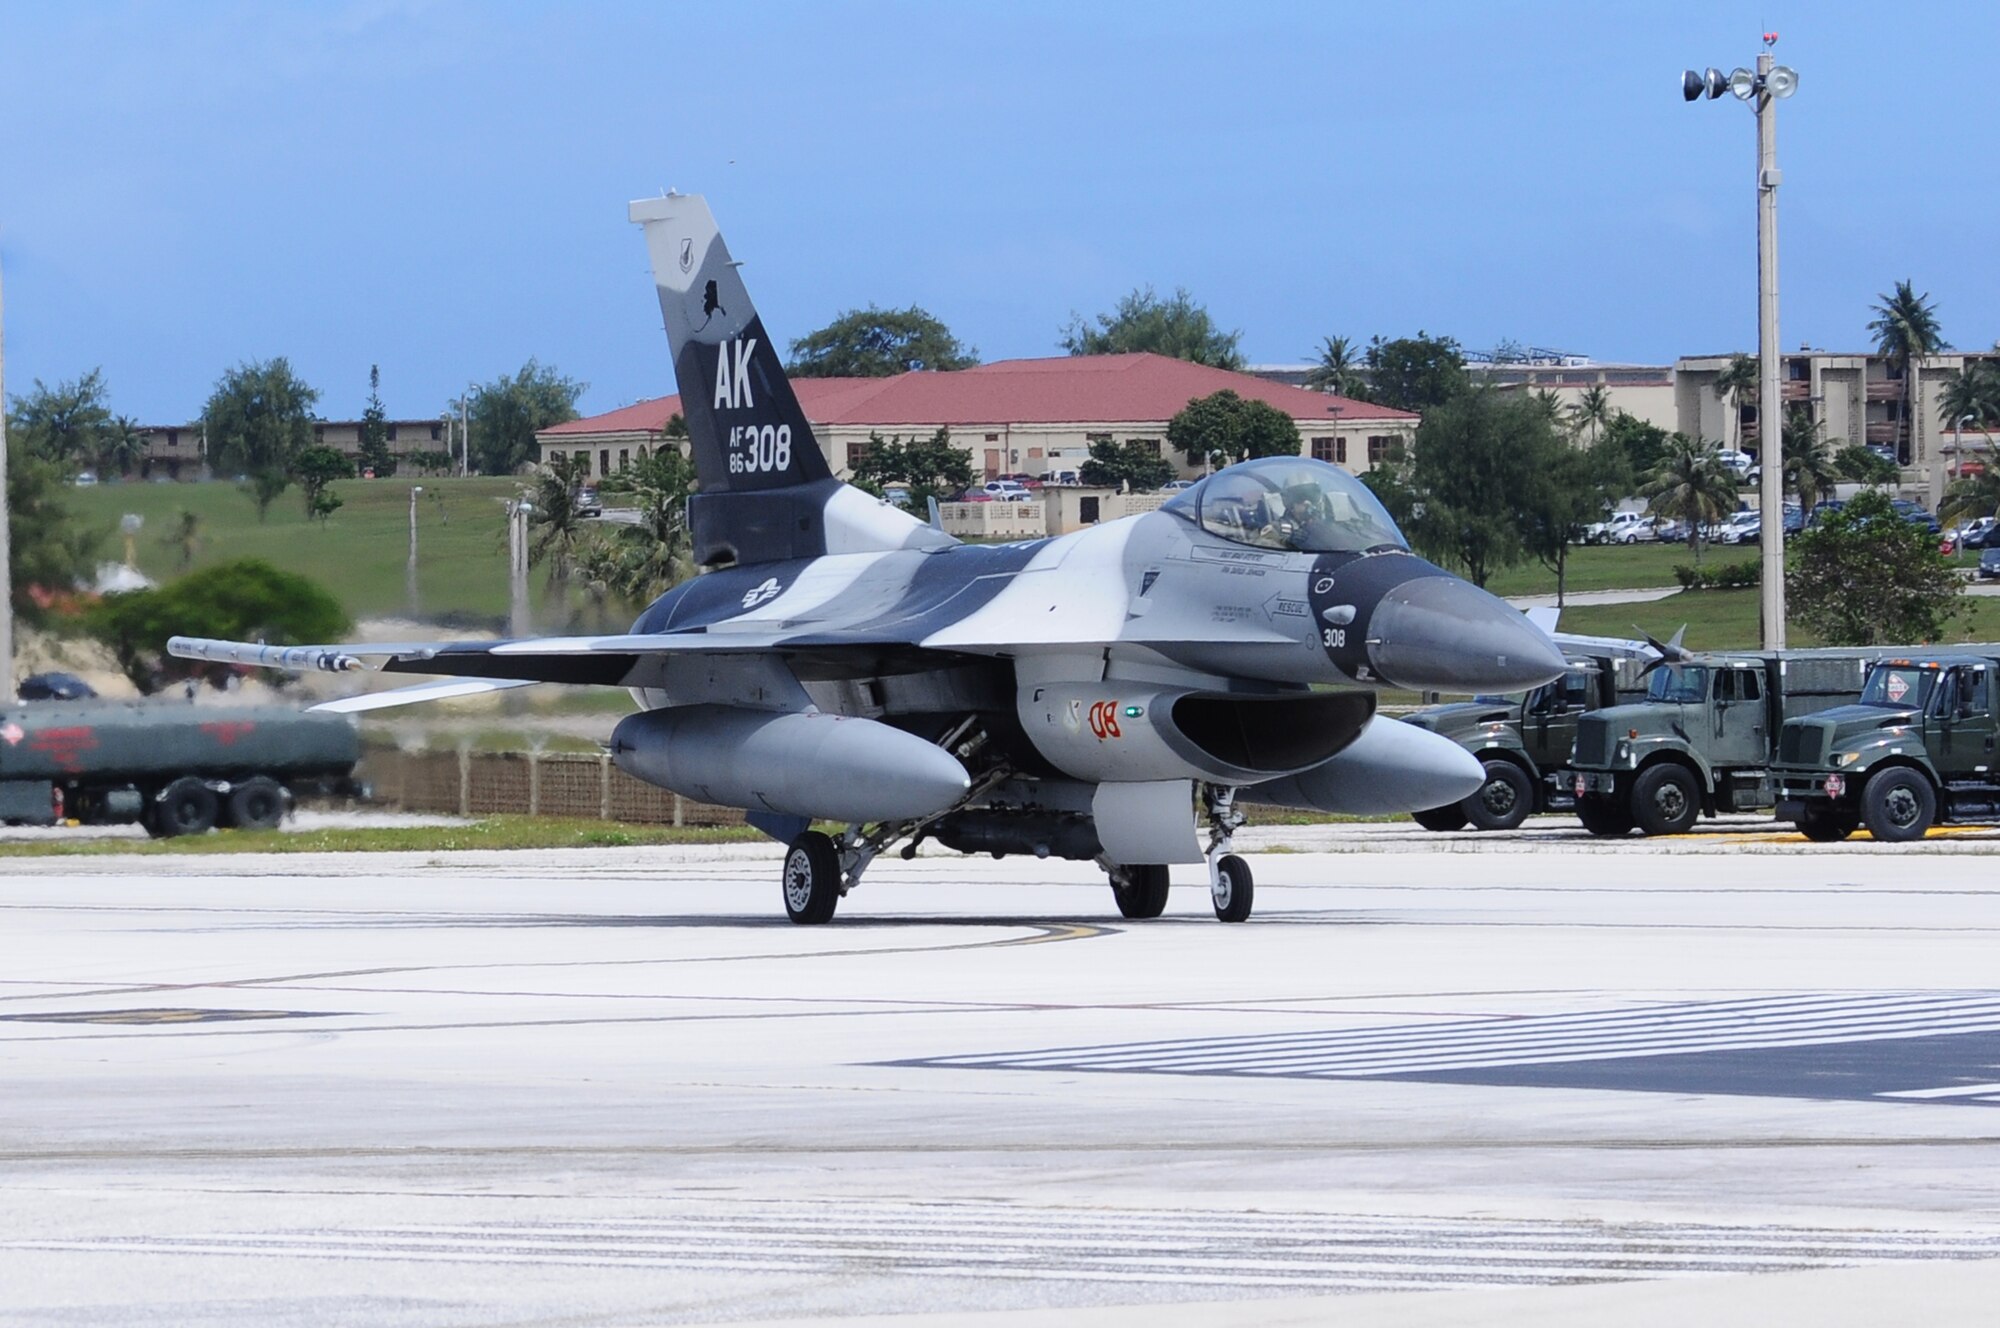 ANDERSEN AIR FORCE BASE, Guam-An F-16 Fighting Falcon Aggressor taxis on the flight line during Cope North 2012, Feb. 14. More than 1,000 military members from units spanning the Pacific are scheduled to begin arriving this week for exercise Cope North. The trilateral exercise, which began Feb. 11 and will run through Feb. 24, is a multinational exercise designed to enhance air operations between the U.S. Air Force, the Japan Air Self Defense Force and the Royal Australian Air Force. (U.S. Air Force photo/ Senior Airman Carlin Leslie)
